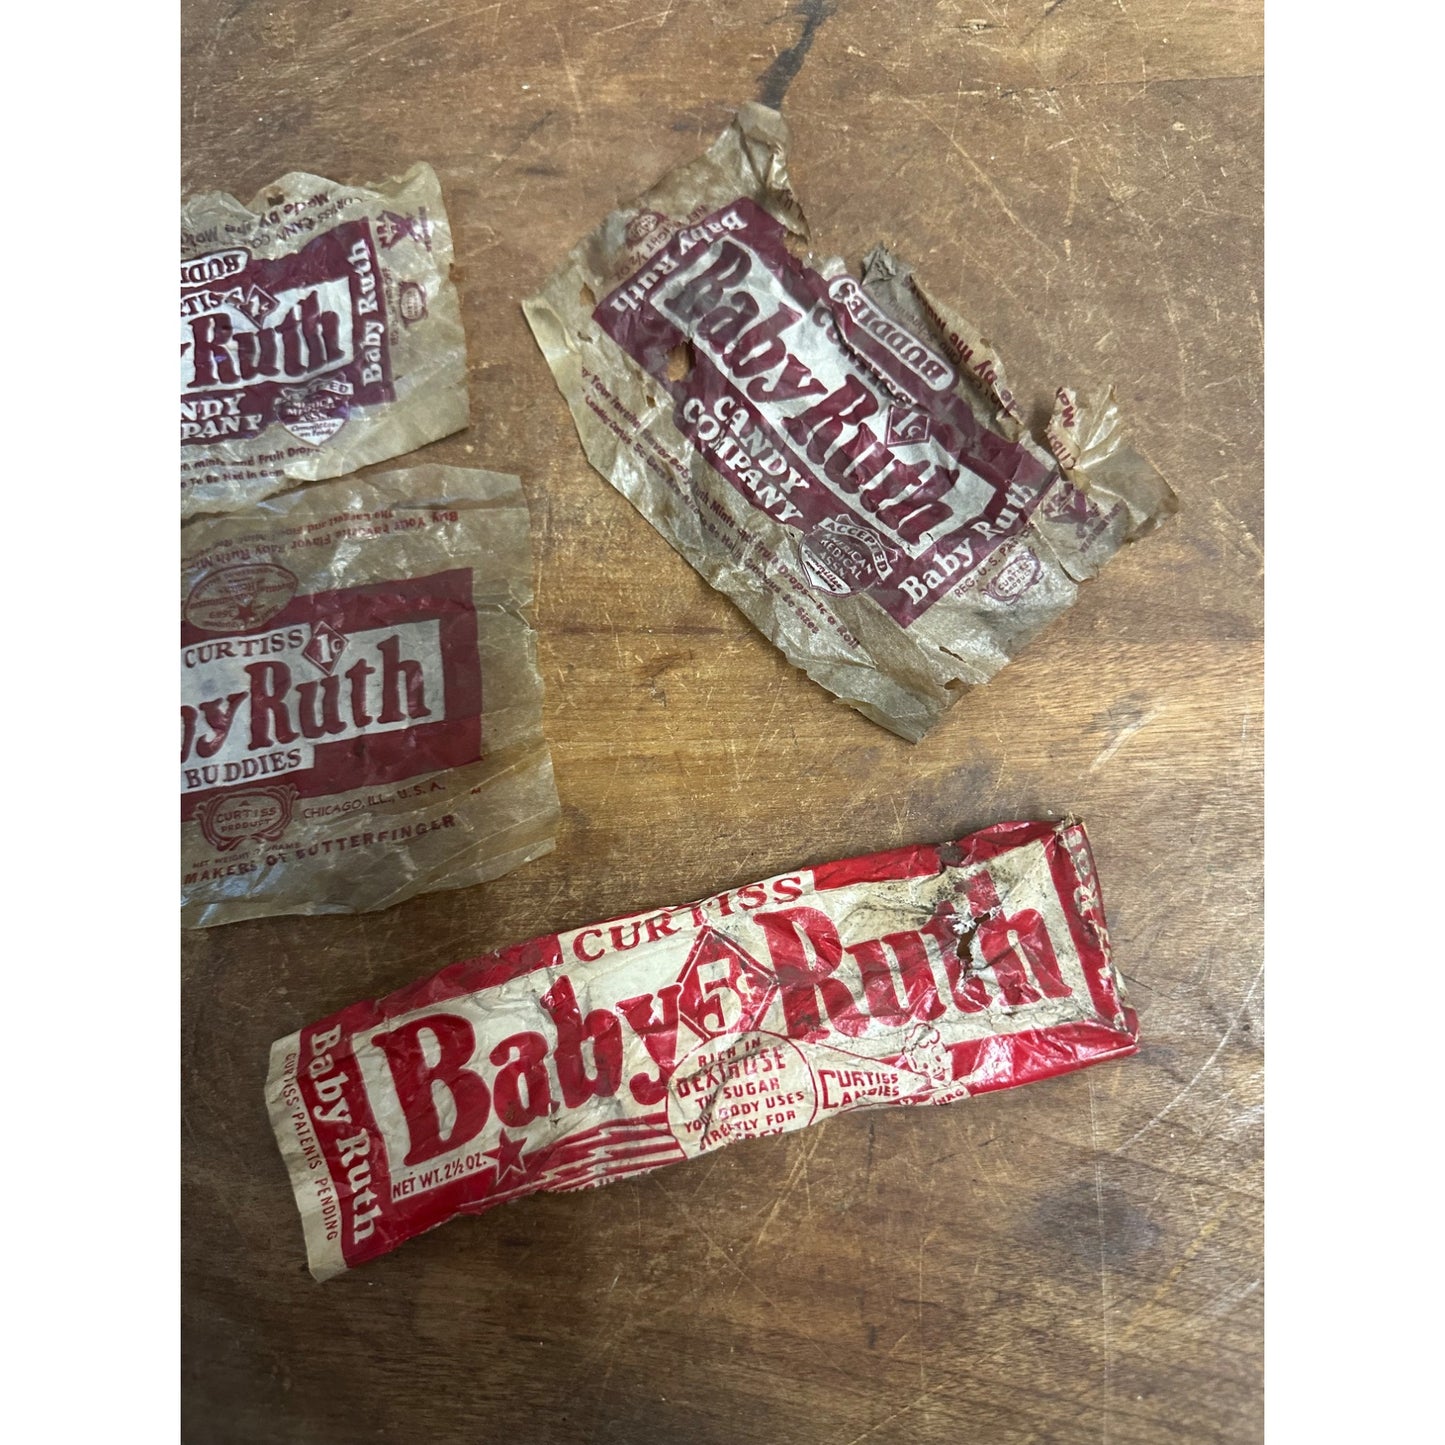 Vintage 1920s-30s Baby Ruth Candy Bar Wax Wrappers Babe Ruth Baseball Curtiss